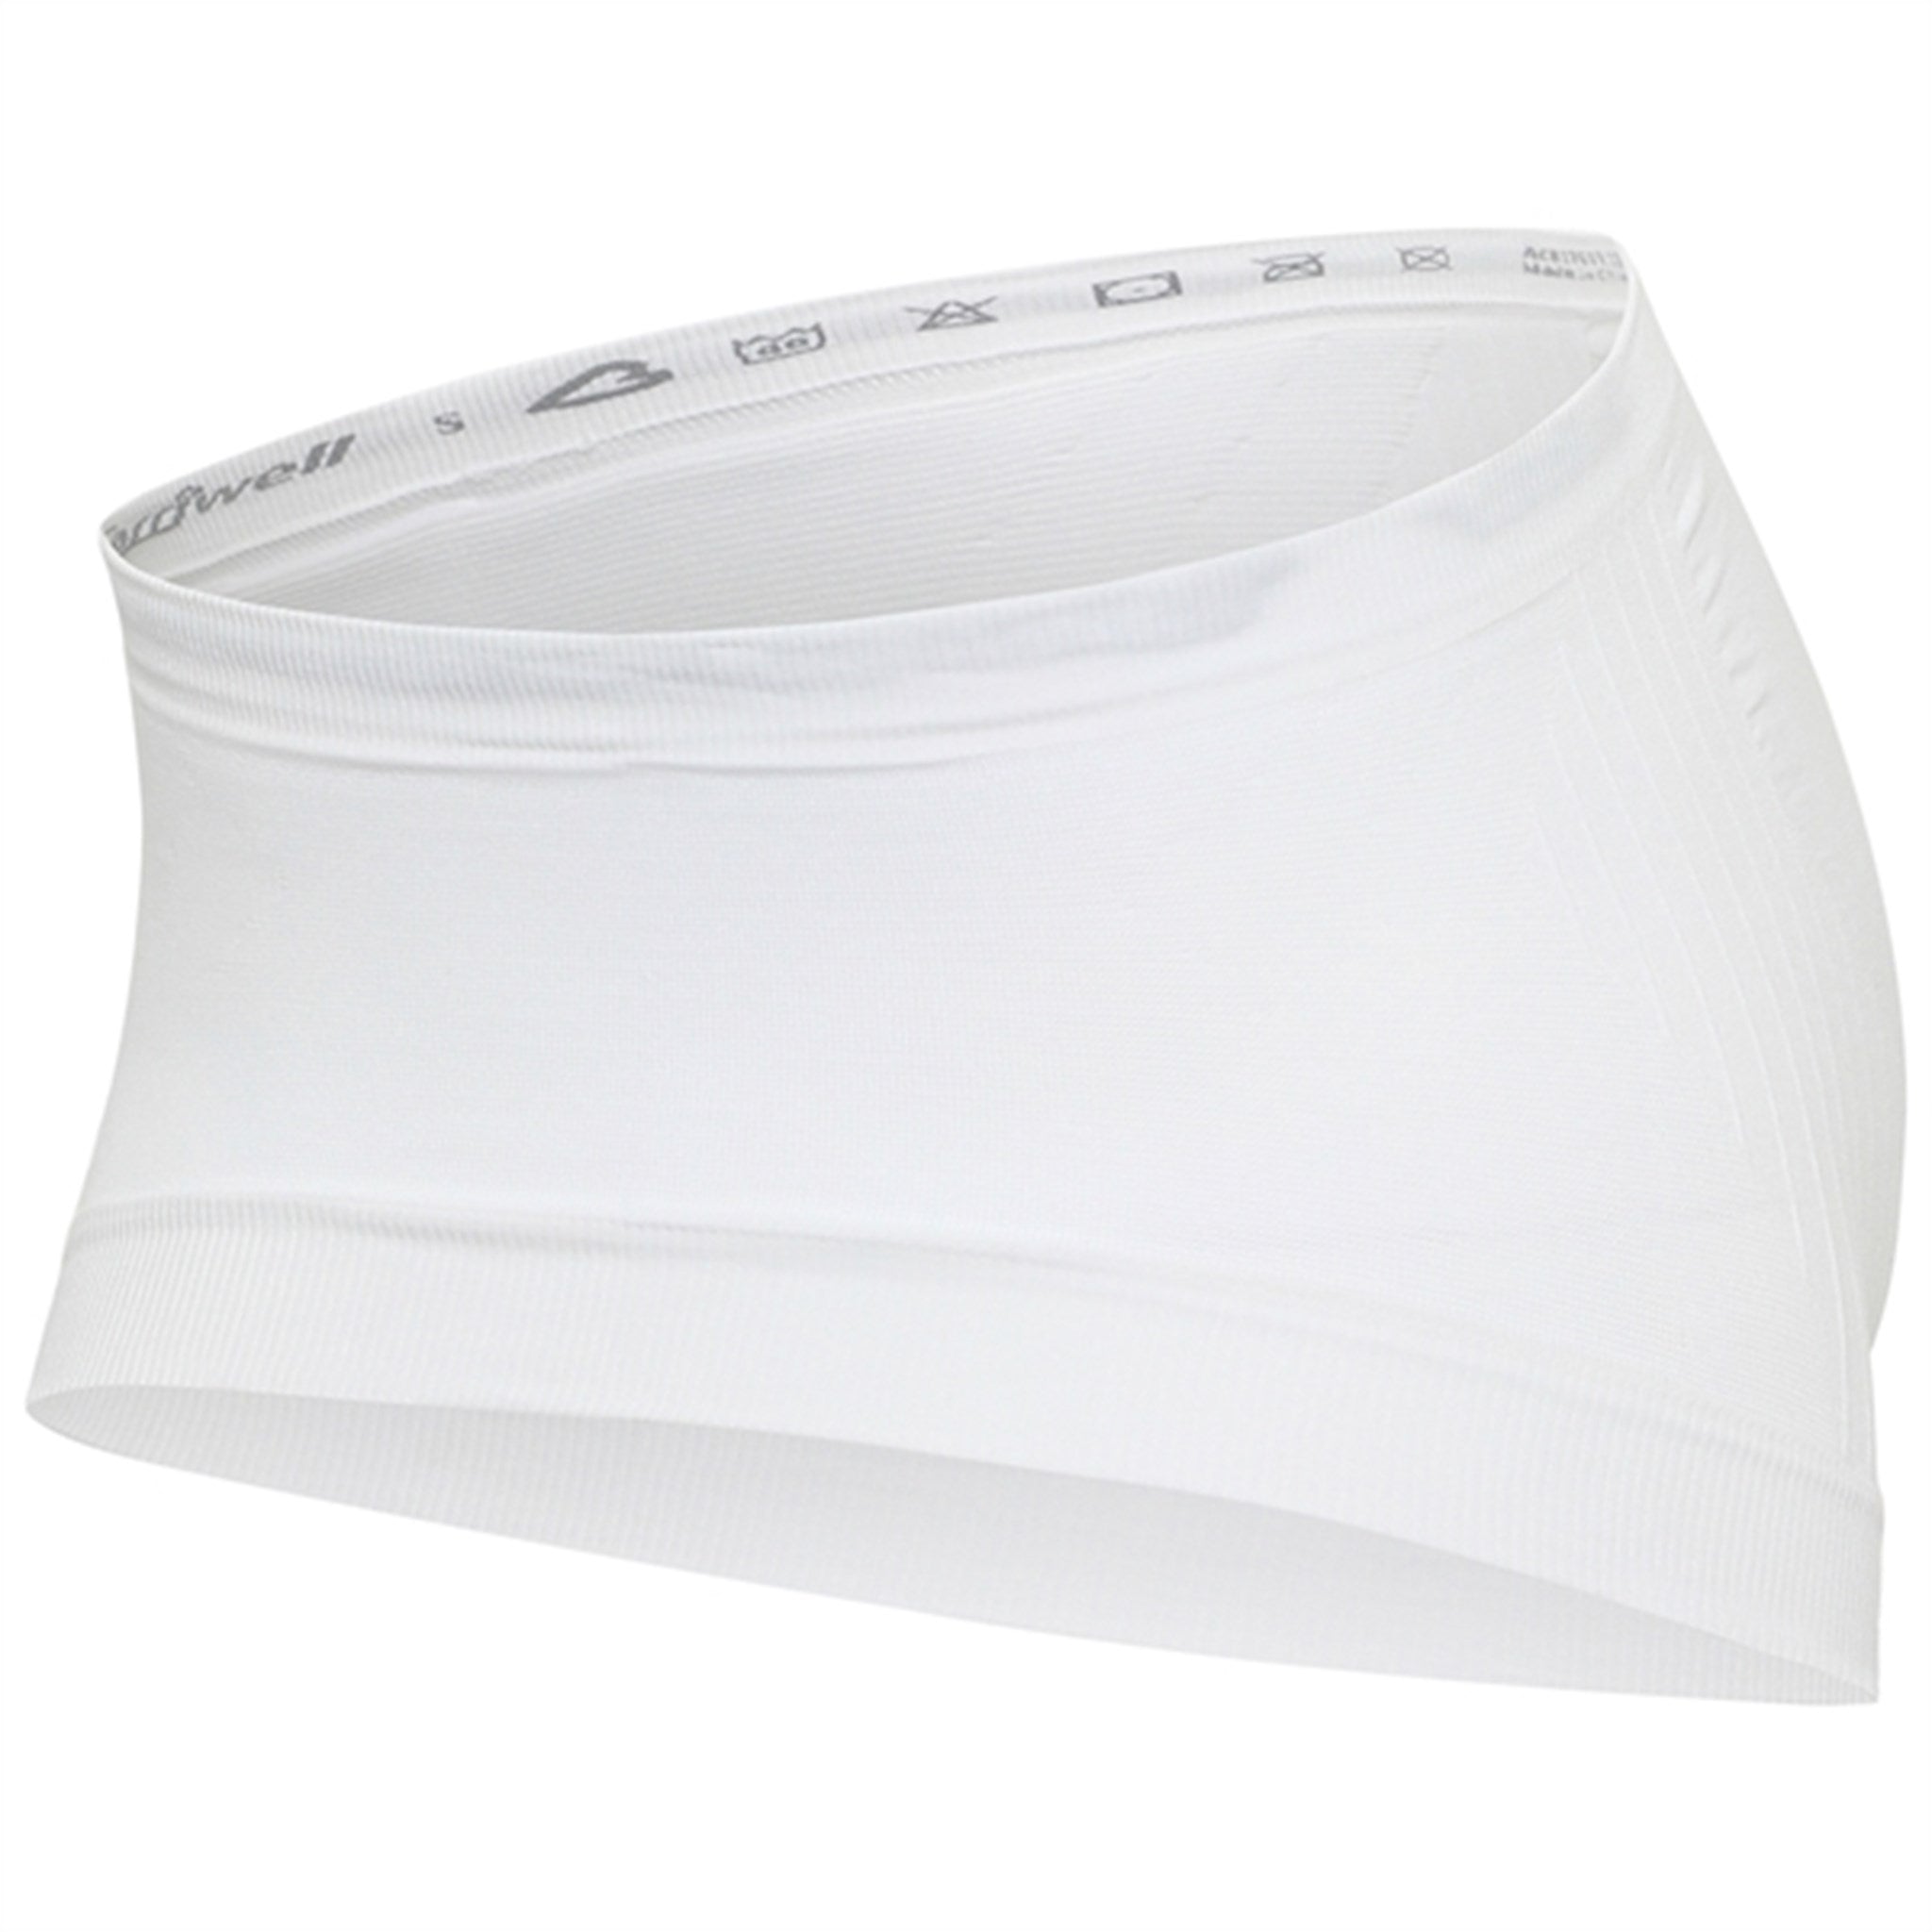 Carriwell Maternity Support Band White 2